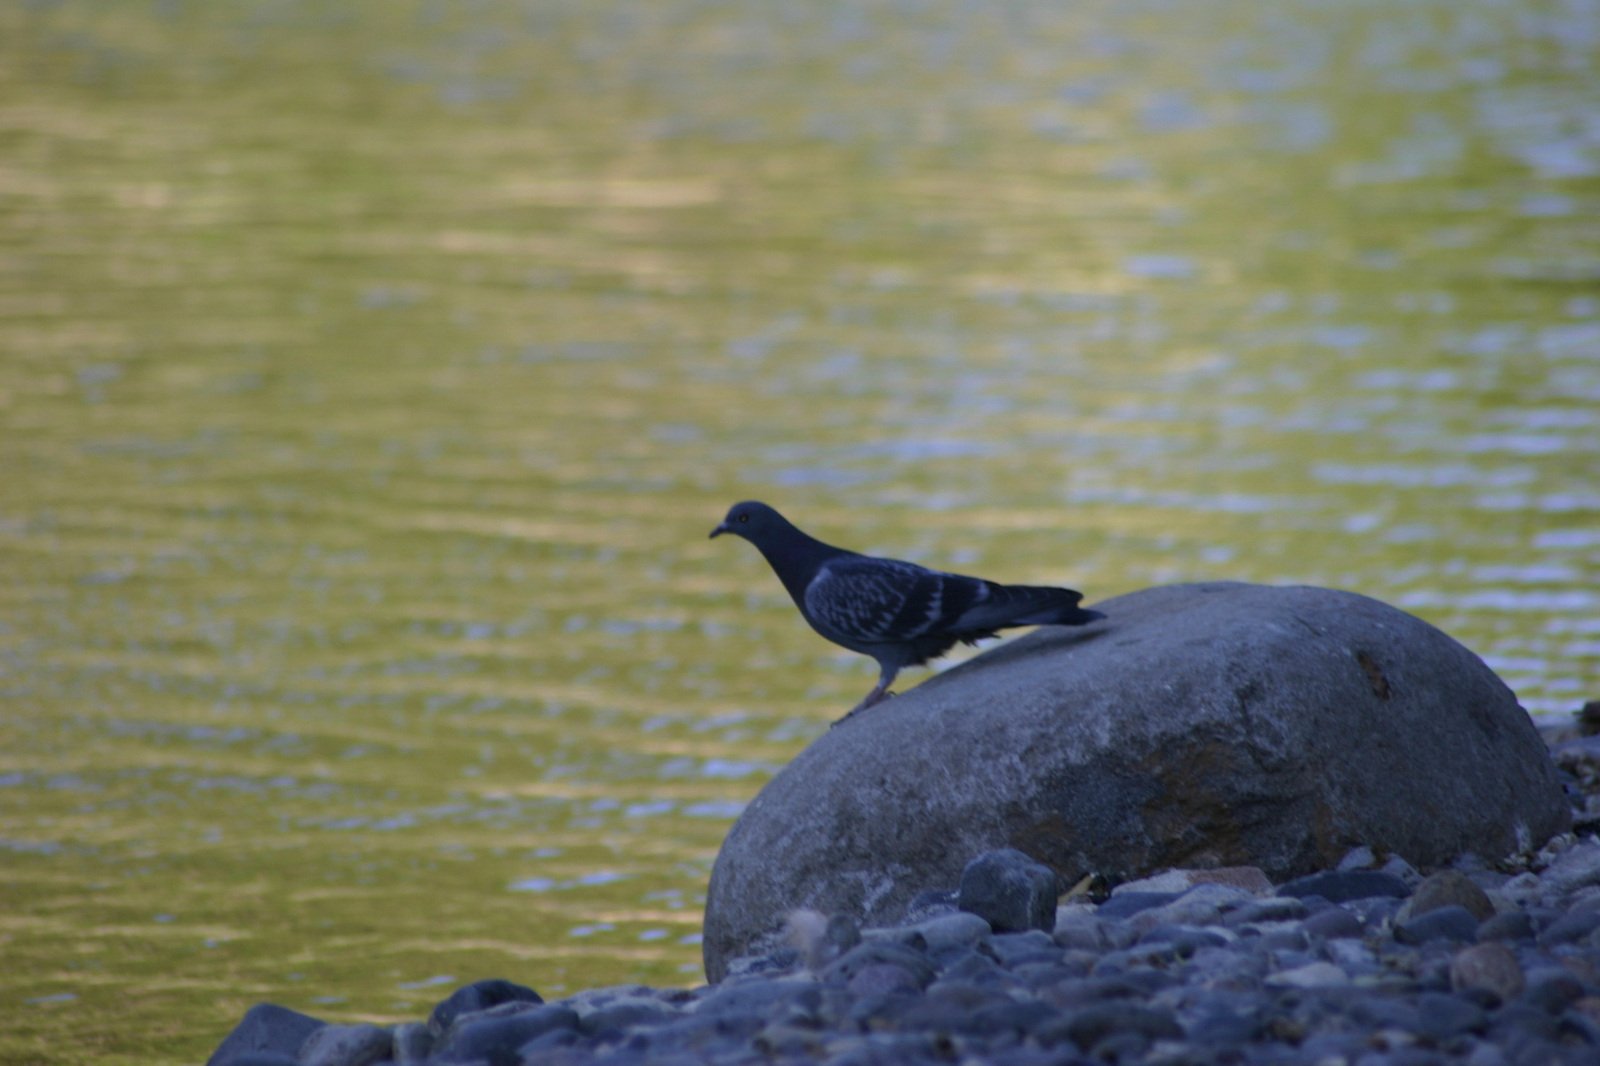 a small bird perched on top of a rock next to water